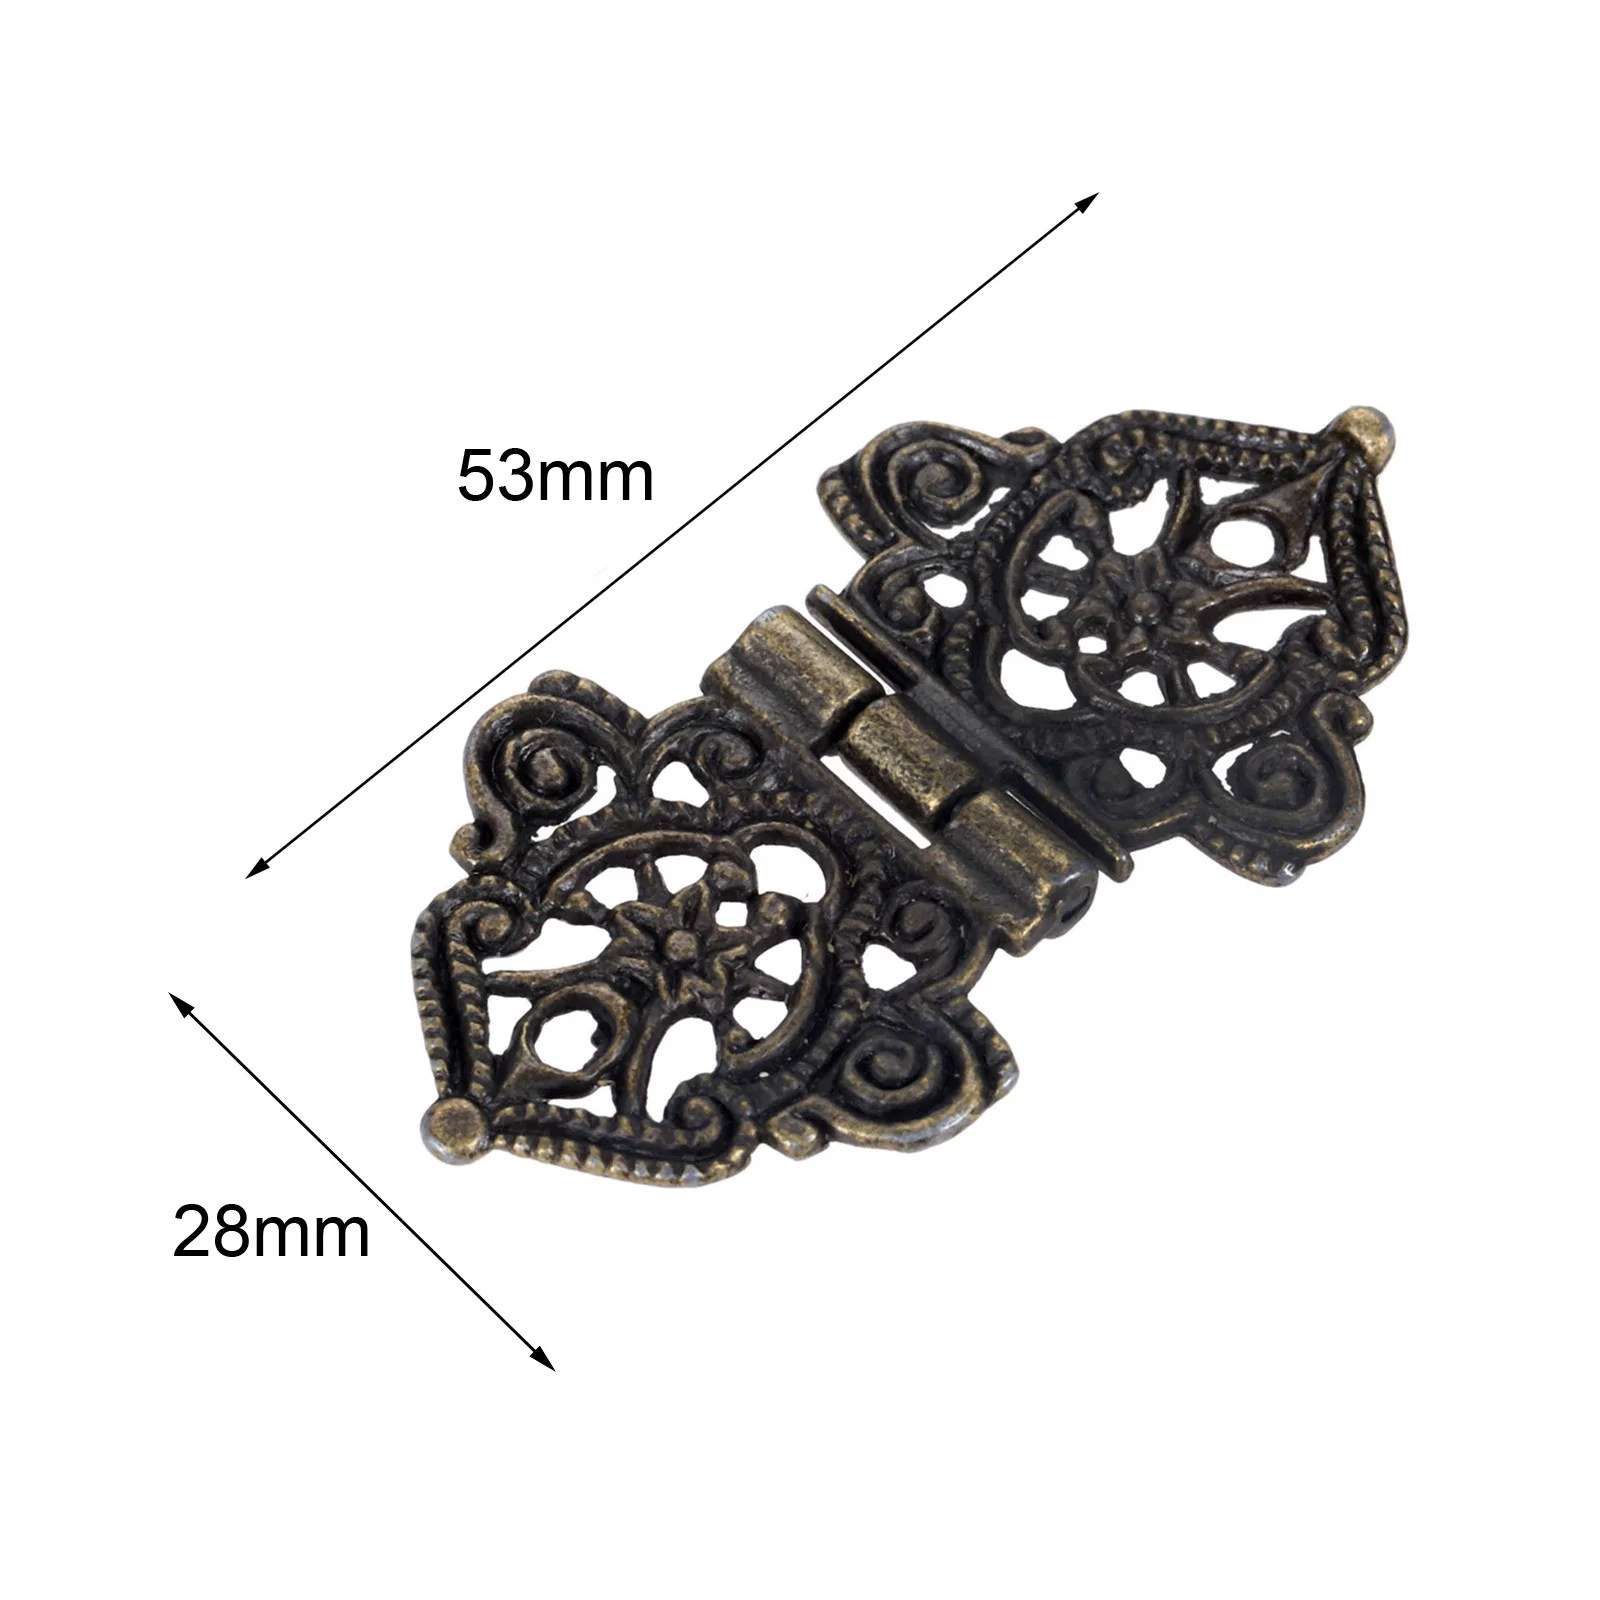 10 Pcs Antique Bronze/Gold Decorative Hinges Wood Box Cabinet Door Butt Hinges Old Chinese Style Furniture Hardware with Screws